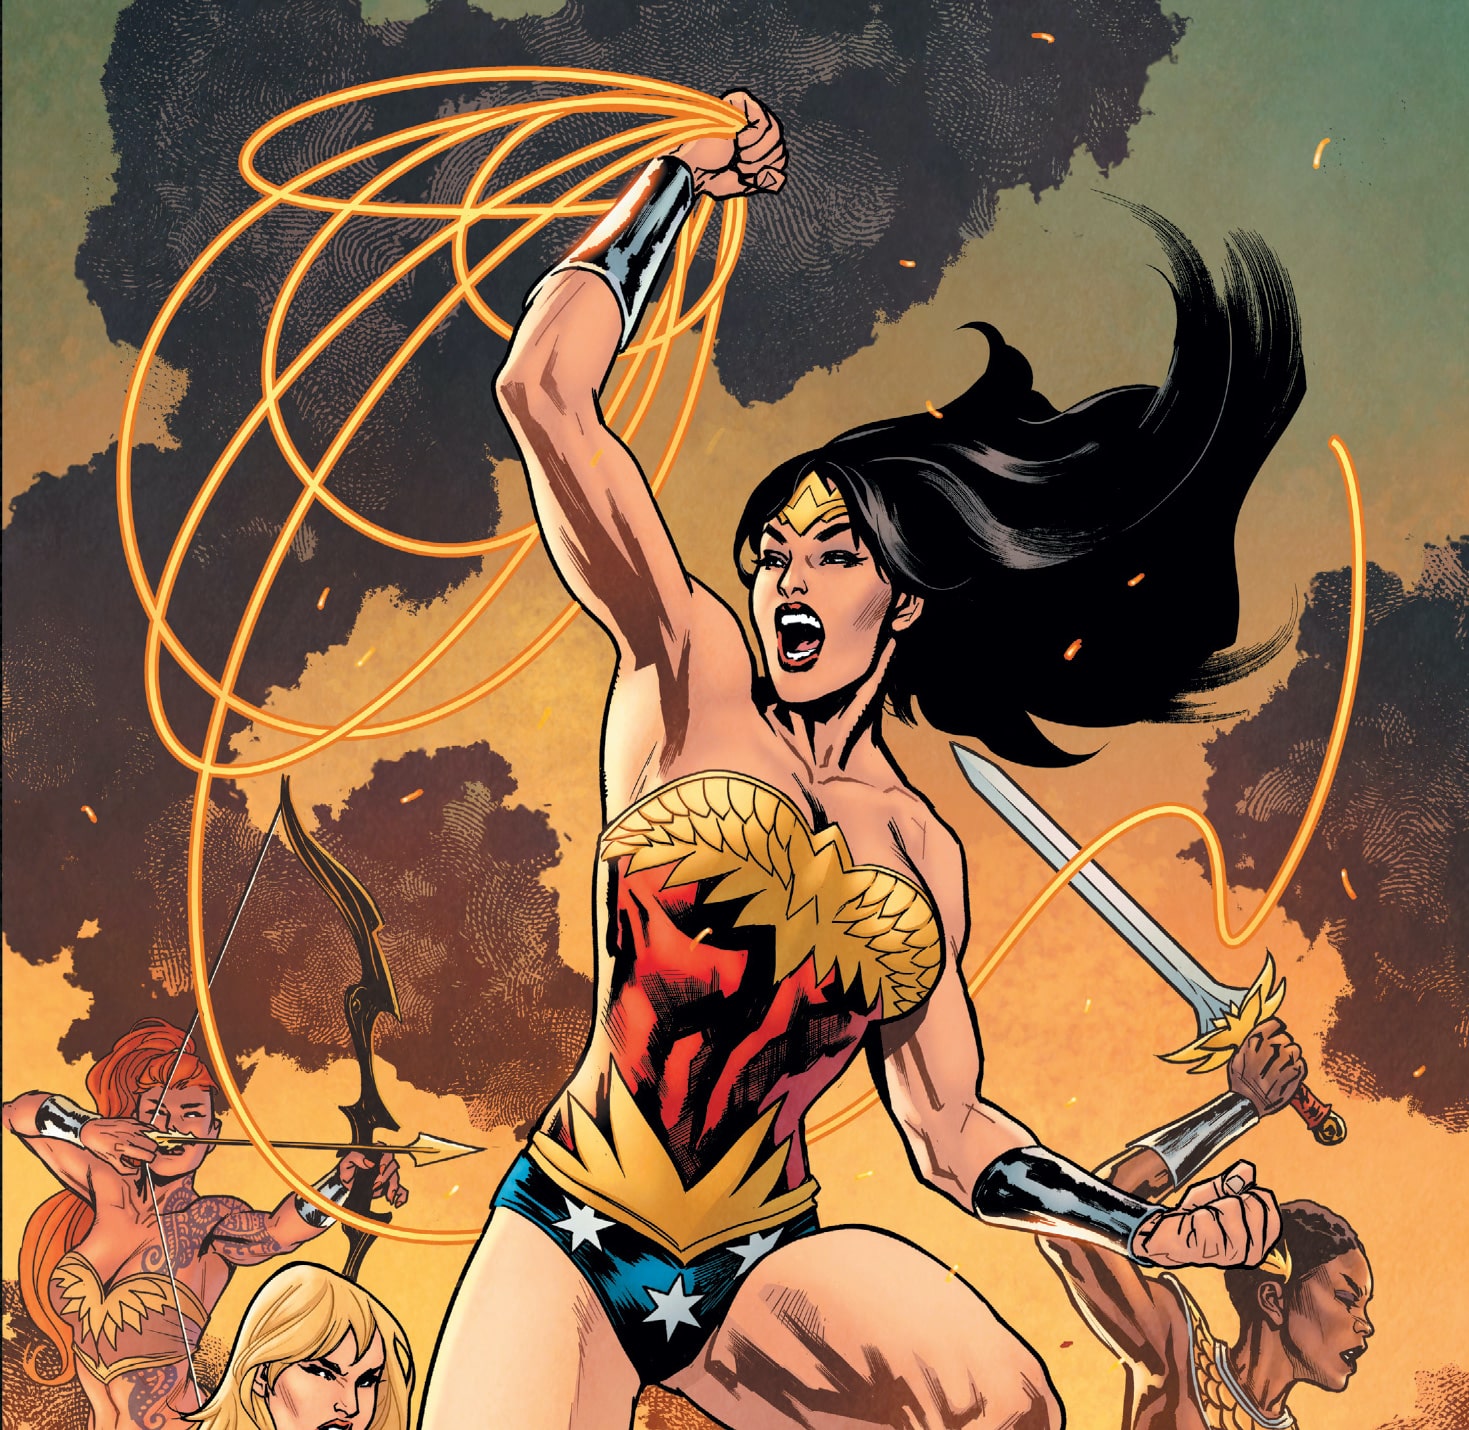 DC Comics announces 'Wonder Woman: Earth One' Vol. 3 for March 9, 2021